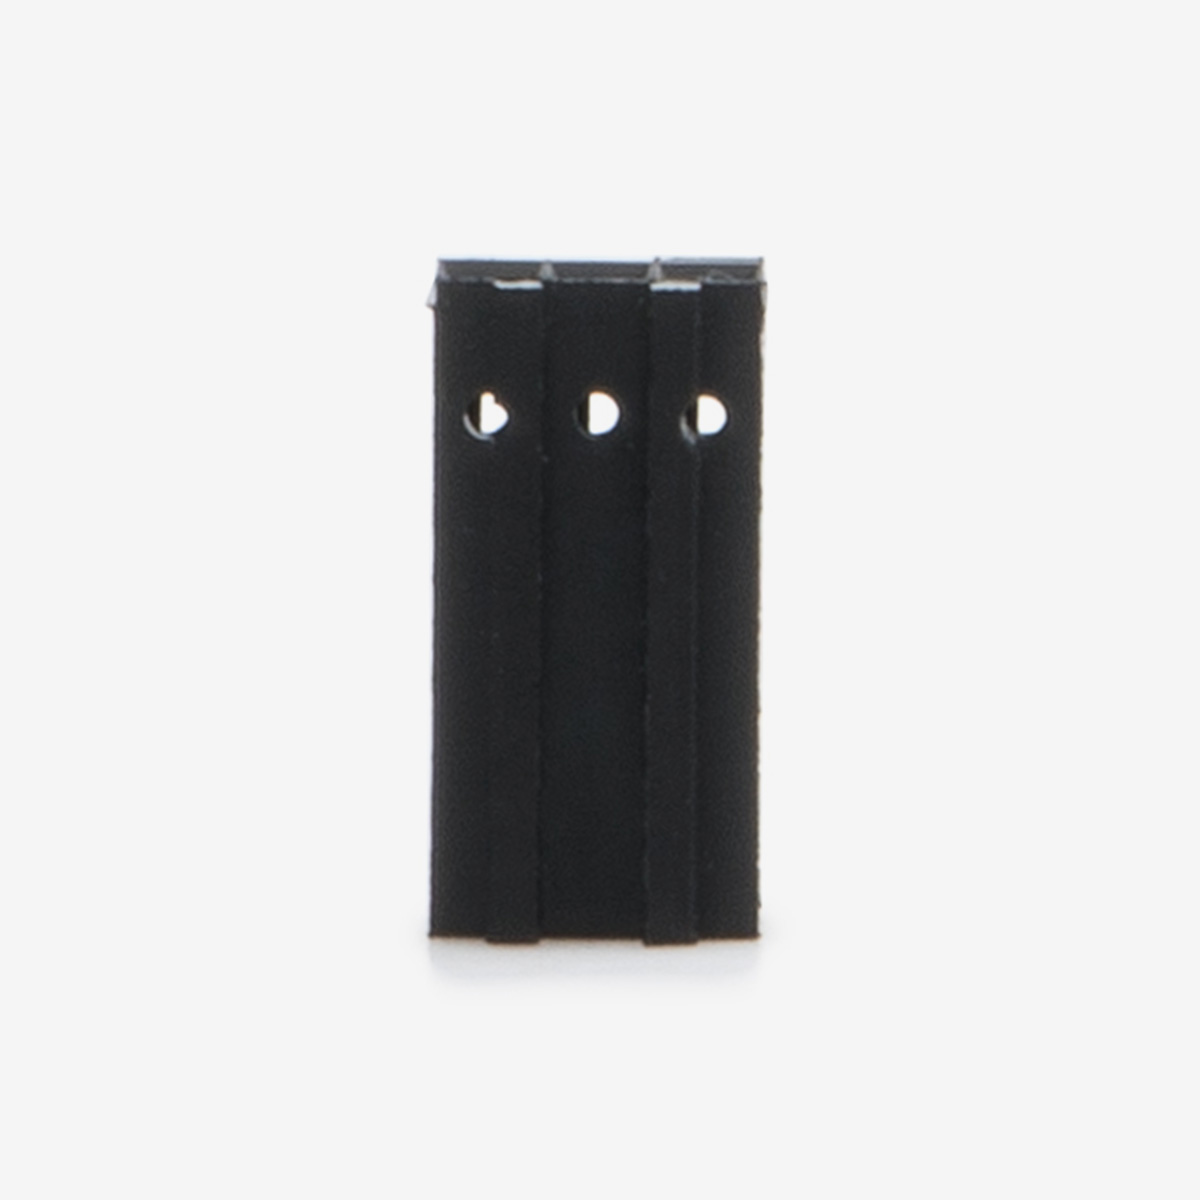 Black 3 position in-line housing connector on white background